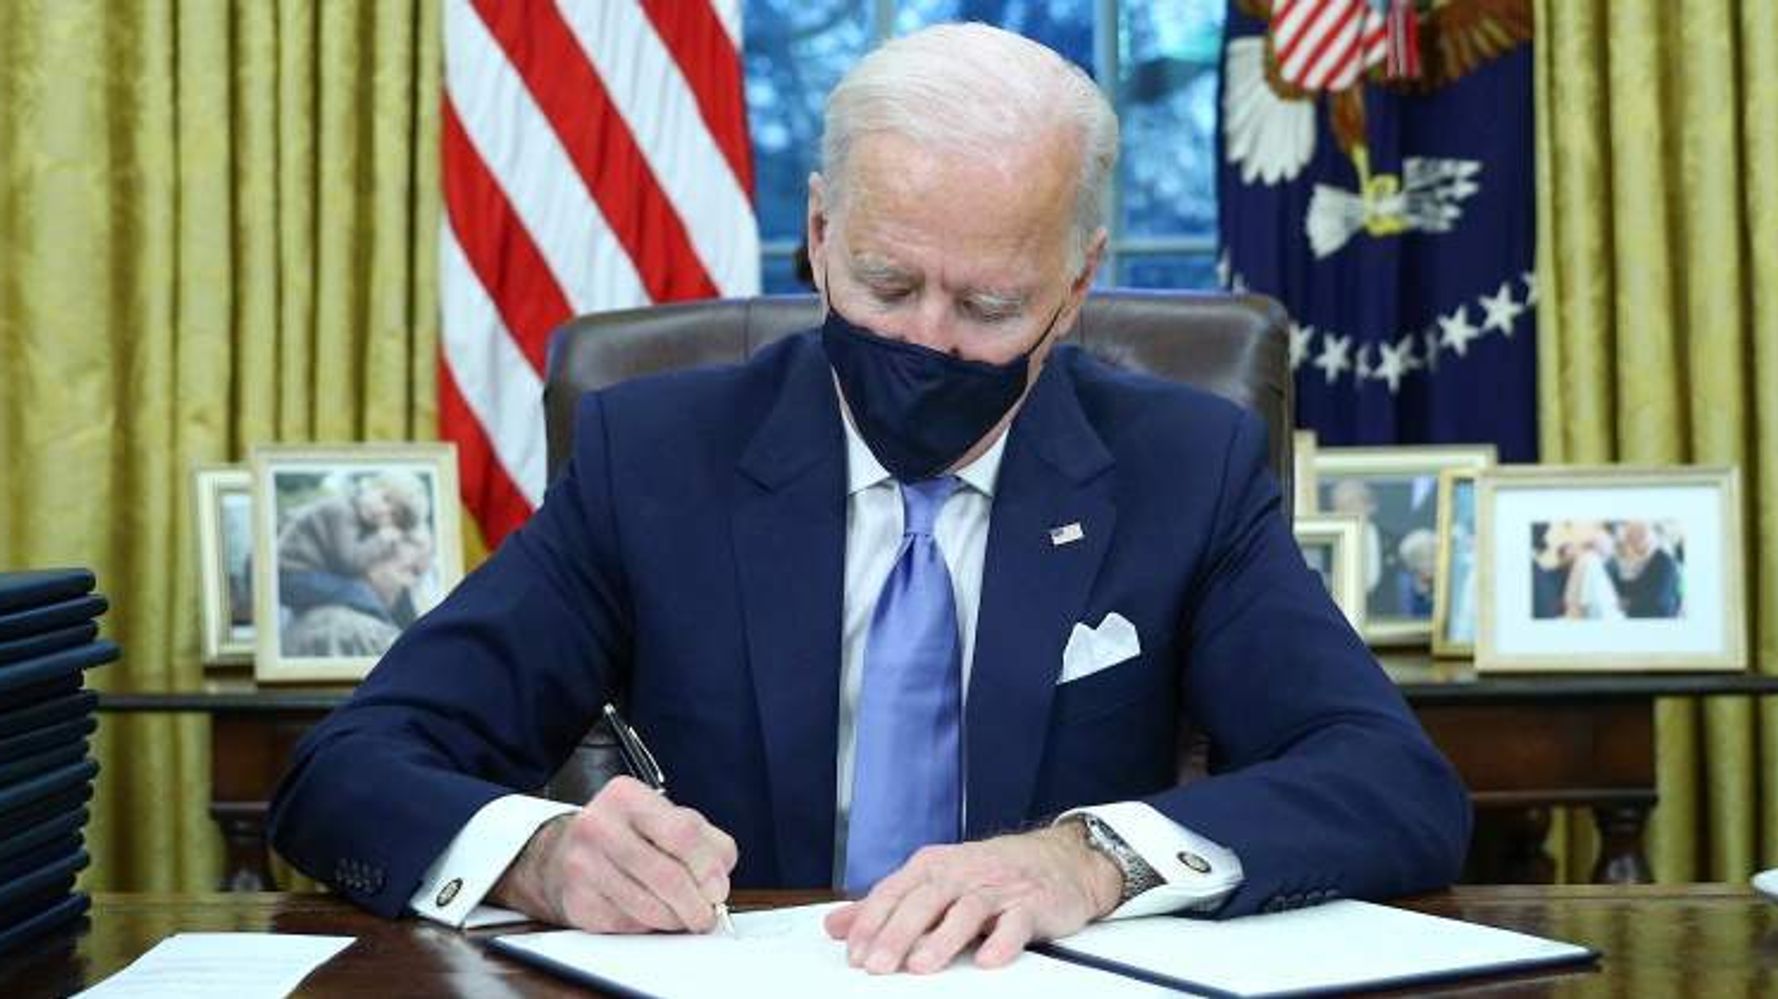 President Joe Biden reached an agreement with the private sector to address the crisis in the supply chain, which includes an extension in the working hours of the port sector to 24x7. He got the support of unions and big chains like Walmart, UPS and FedEx